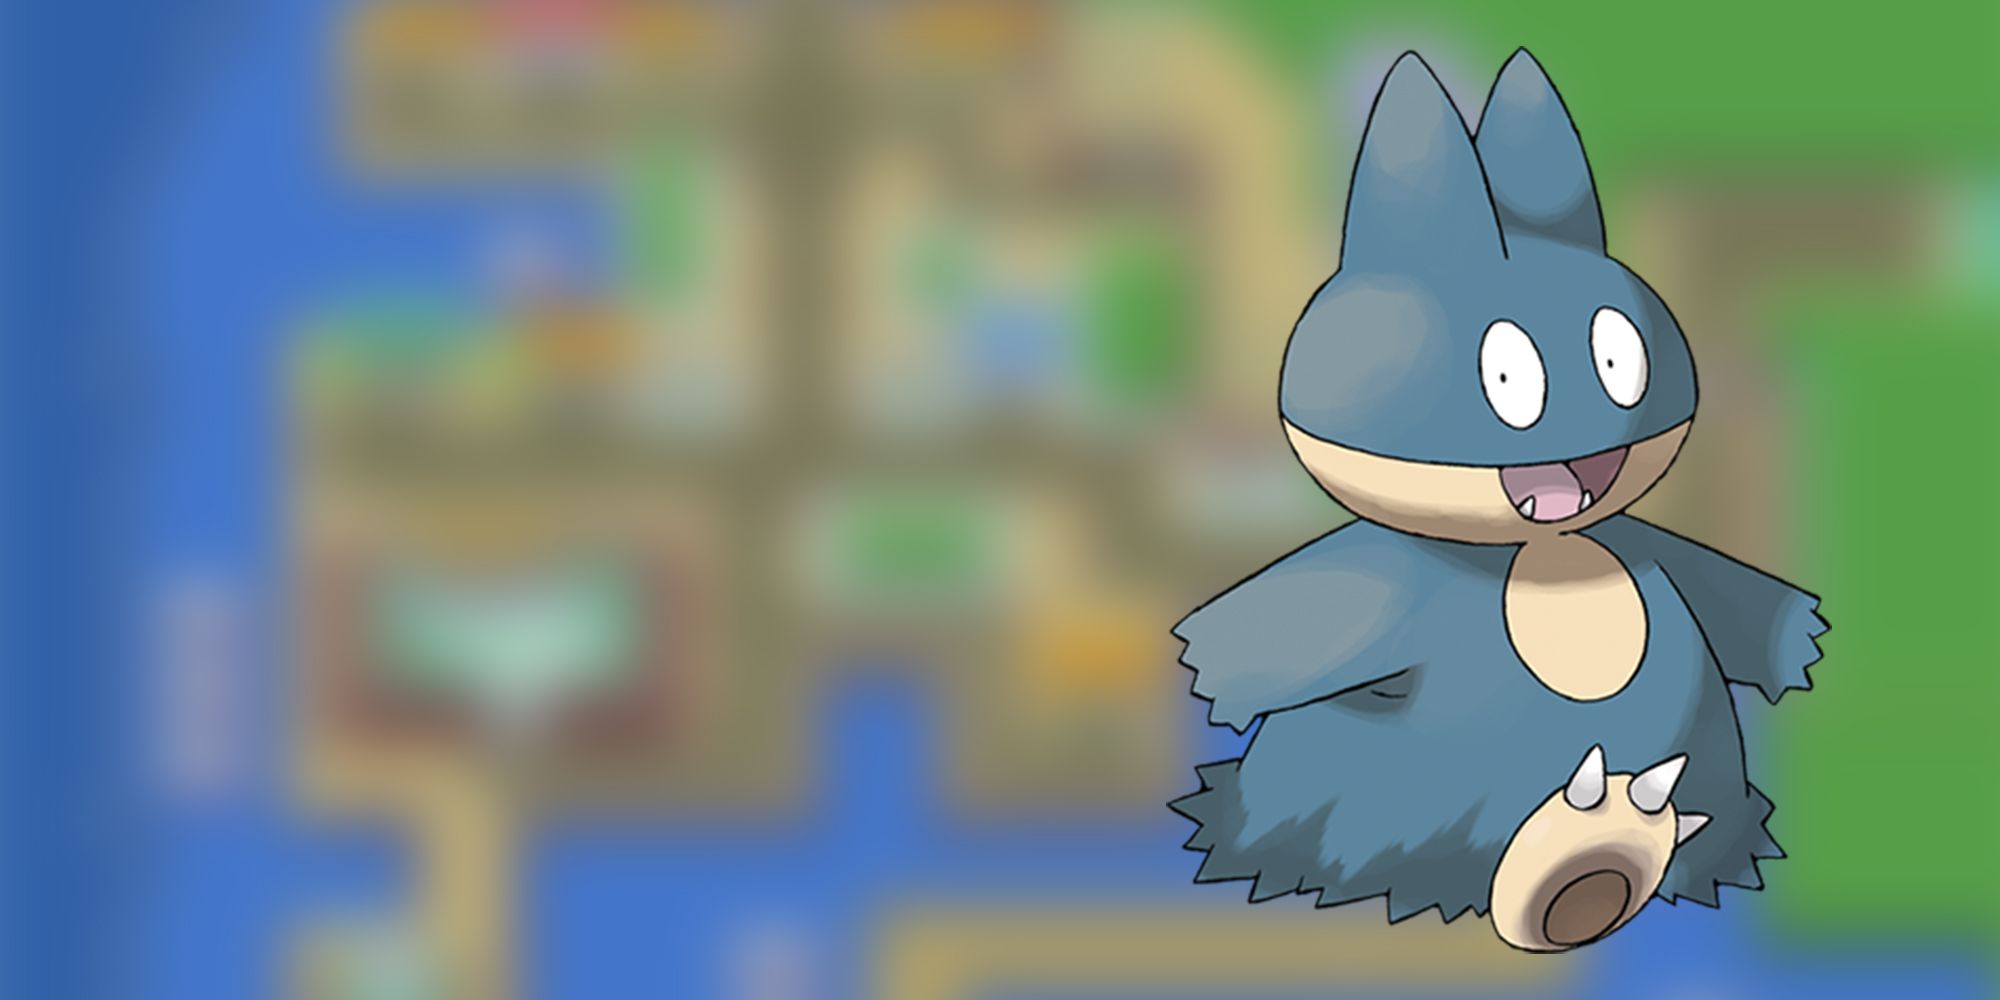 Munchlax Posed Over a Blurred Background